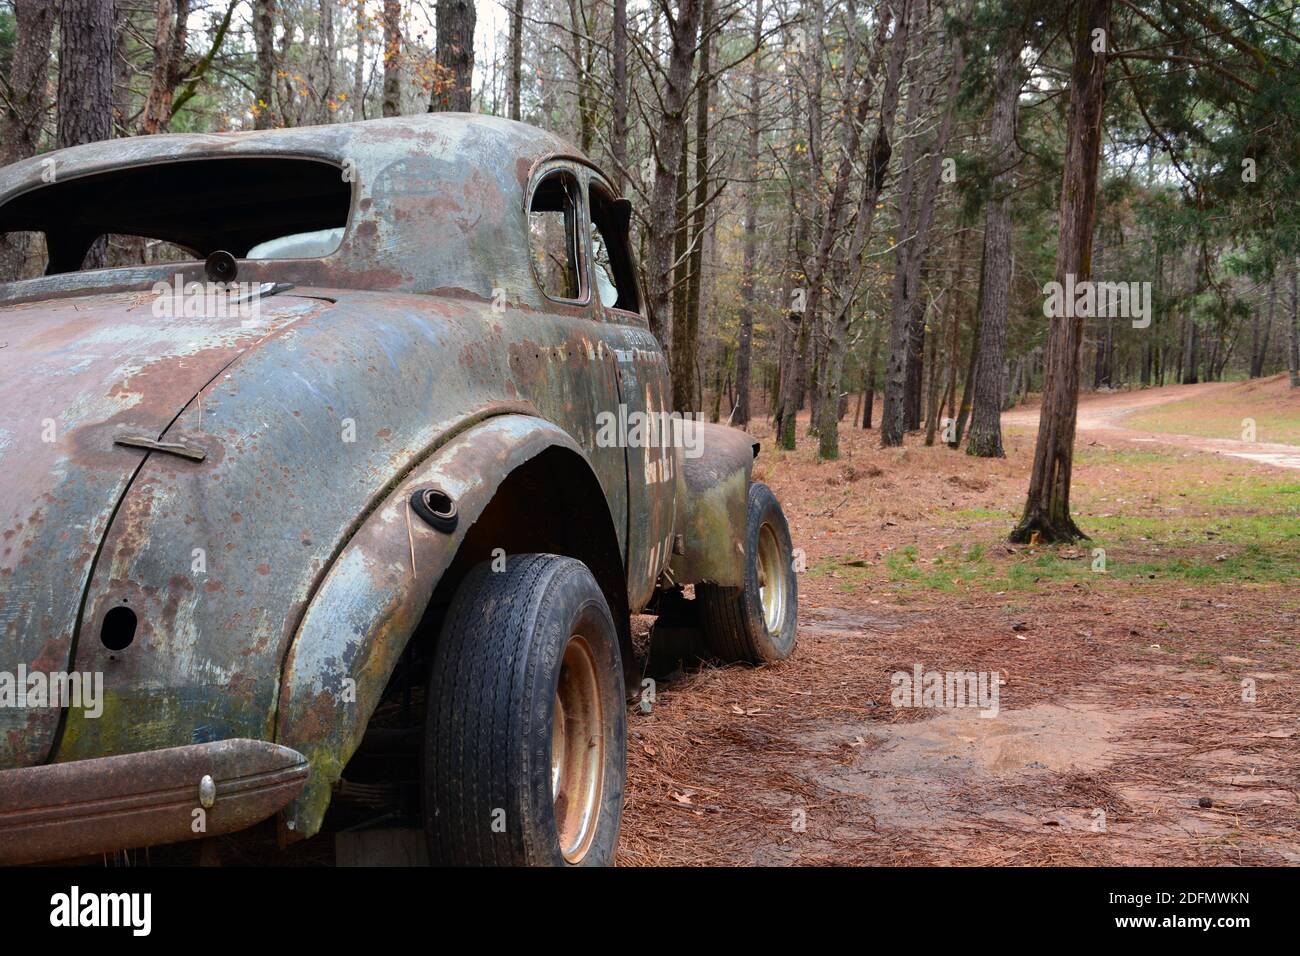 An abandoned vintage race car at the former Occoneechee Speedway, a dirt oval NASCAR track converted to a hiking trail in 2003 Stock Photo